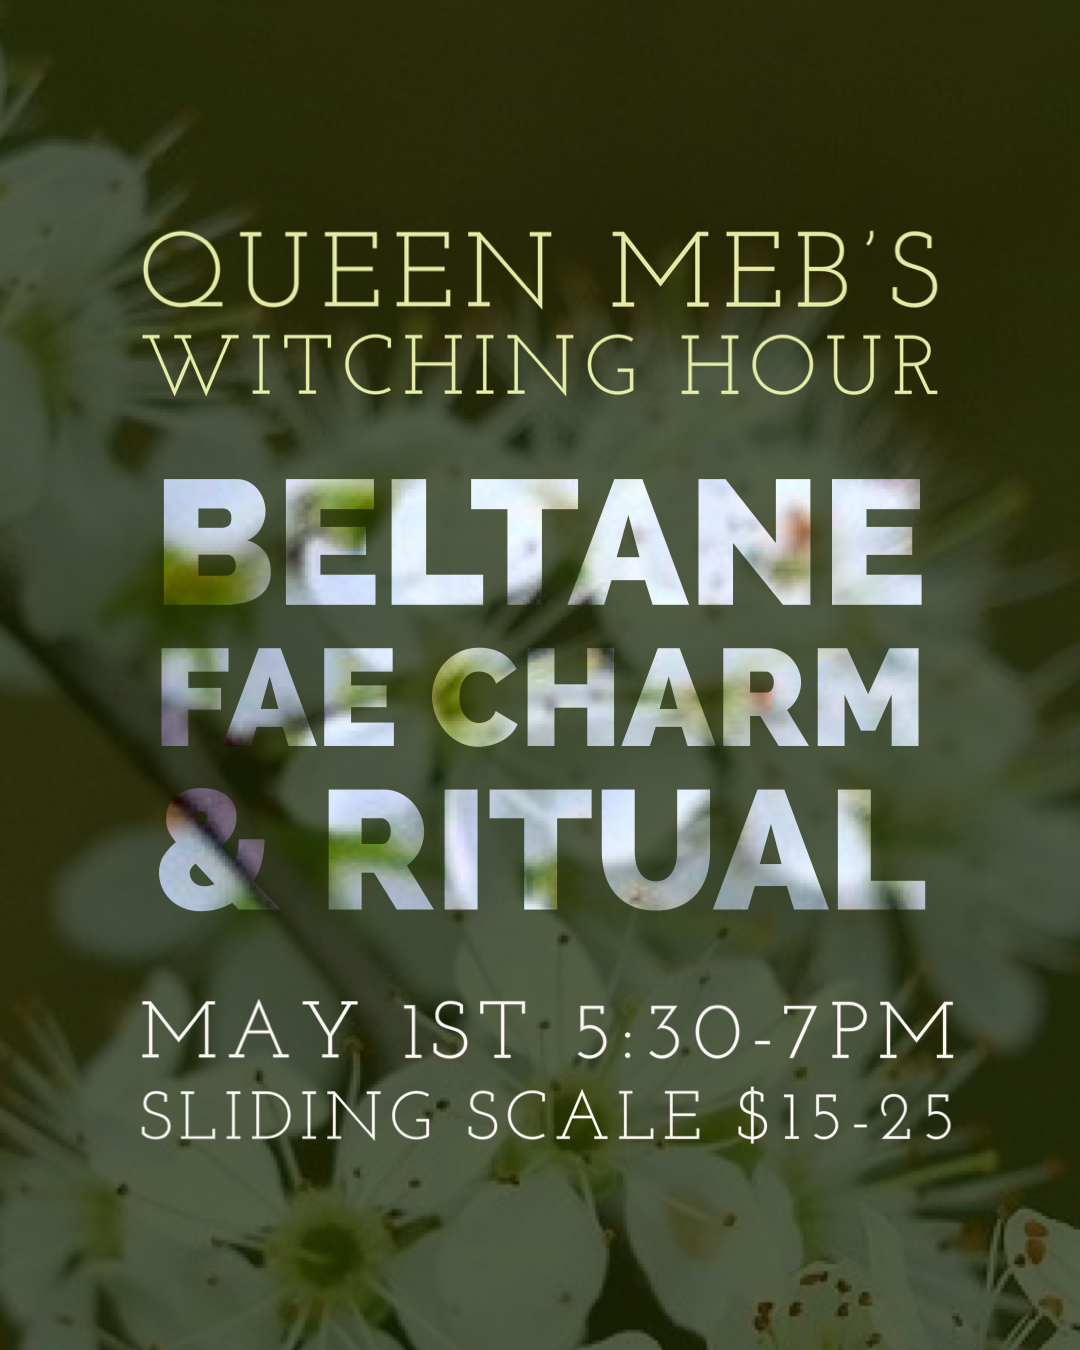 Witching Hour: Beltane Fertility Charm & Ritual - May 1st - 5:30-7 pm